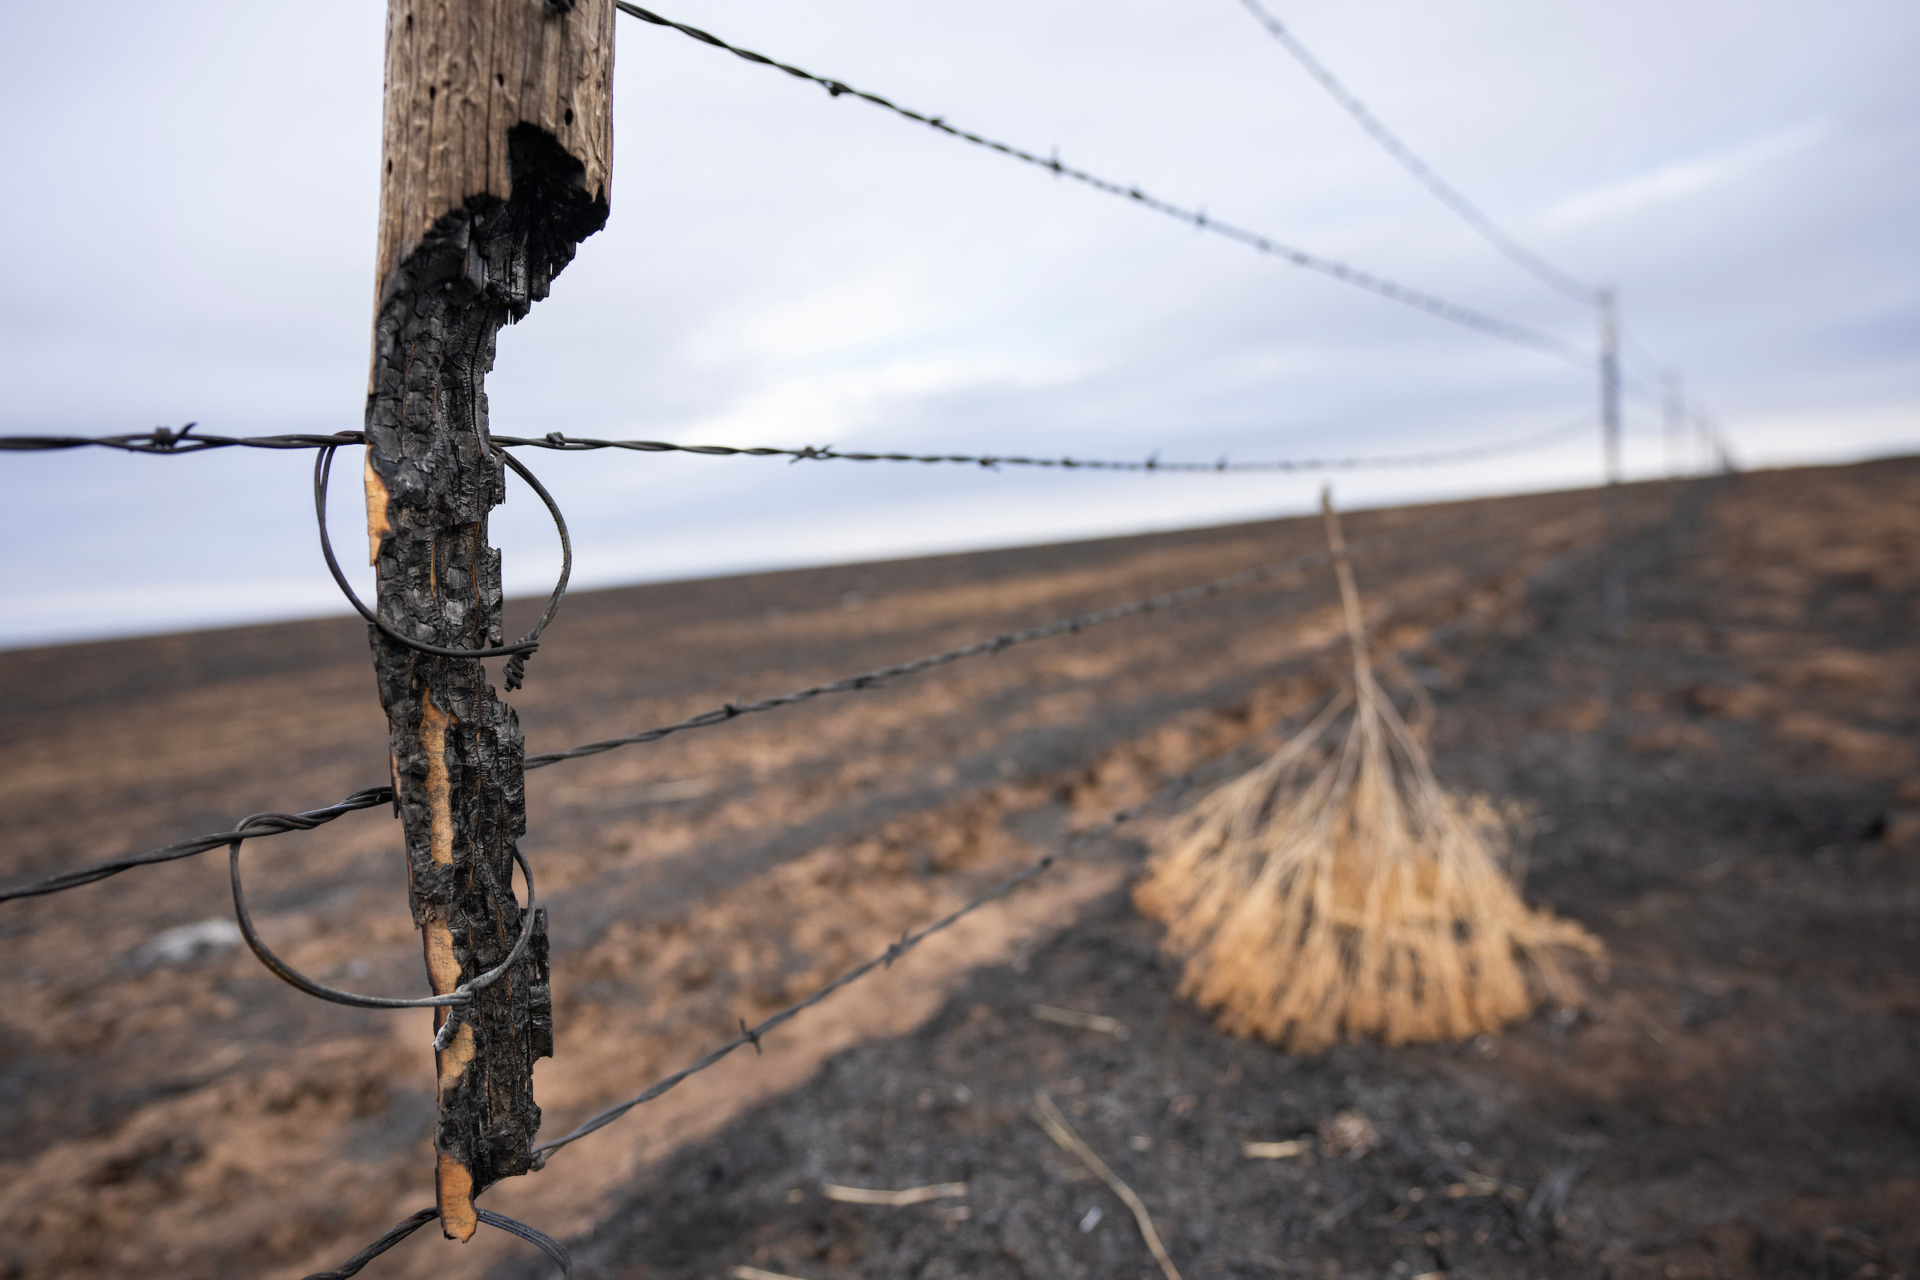 Replacing thousands of miles of burned fences in the Texas Panhandle